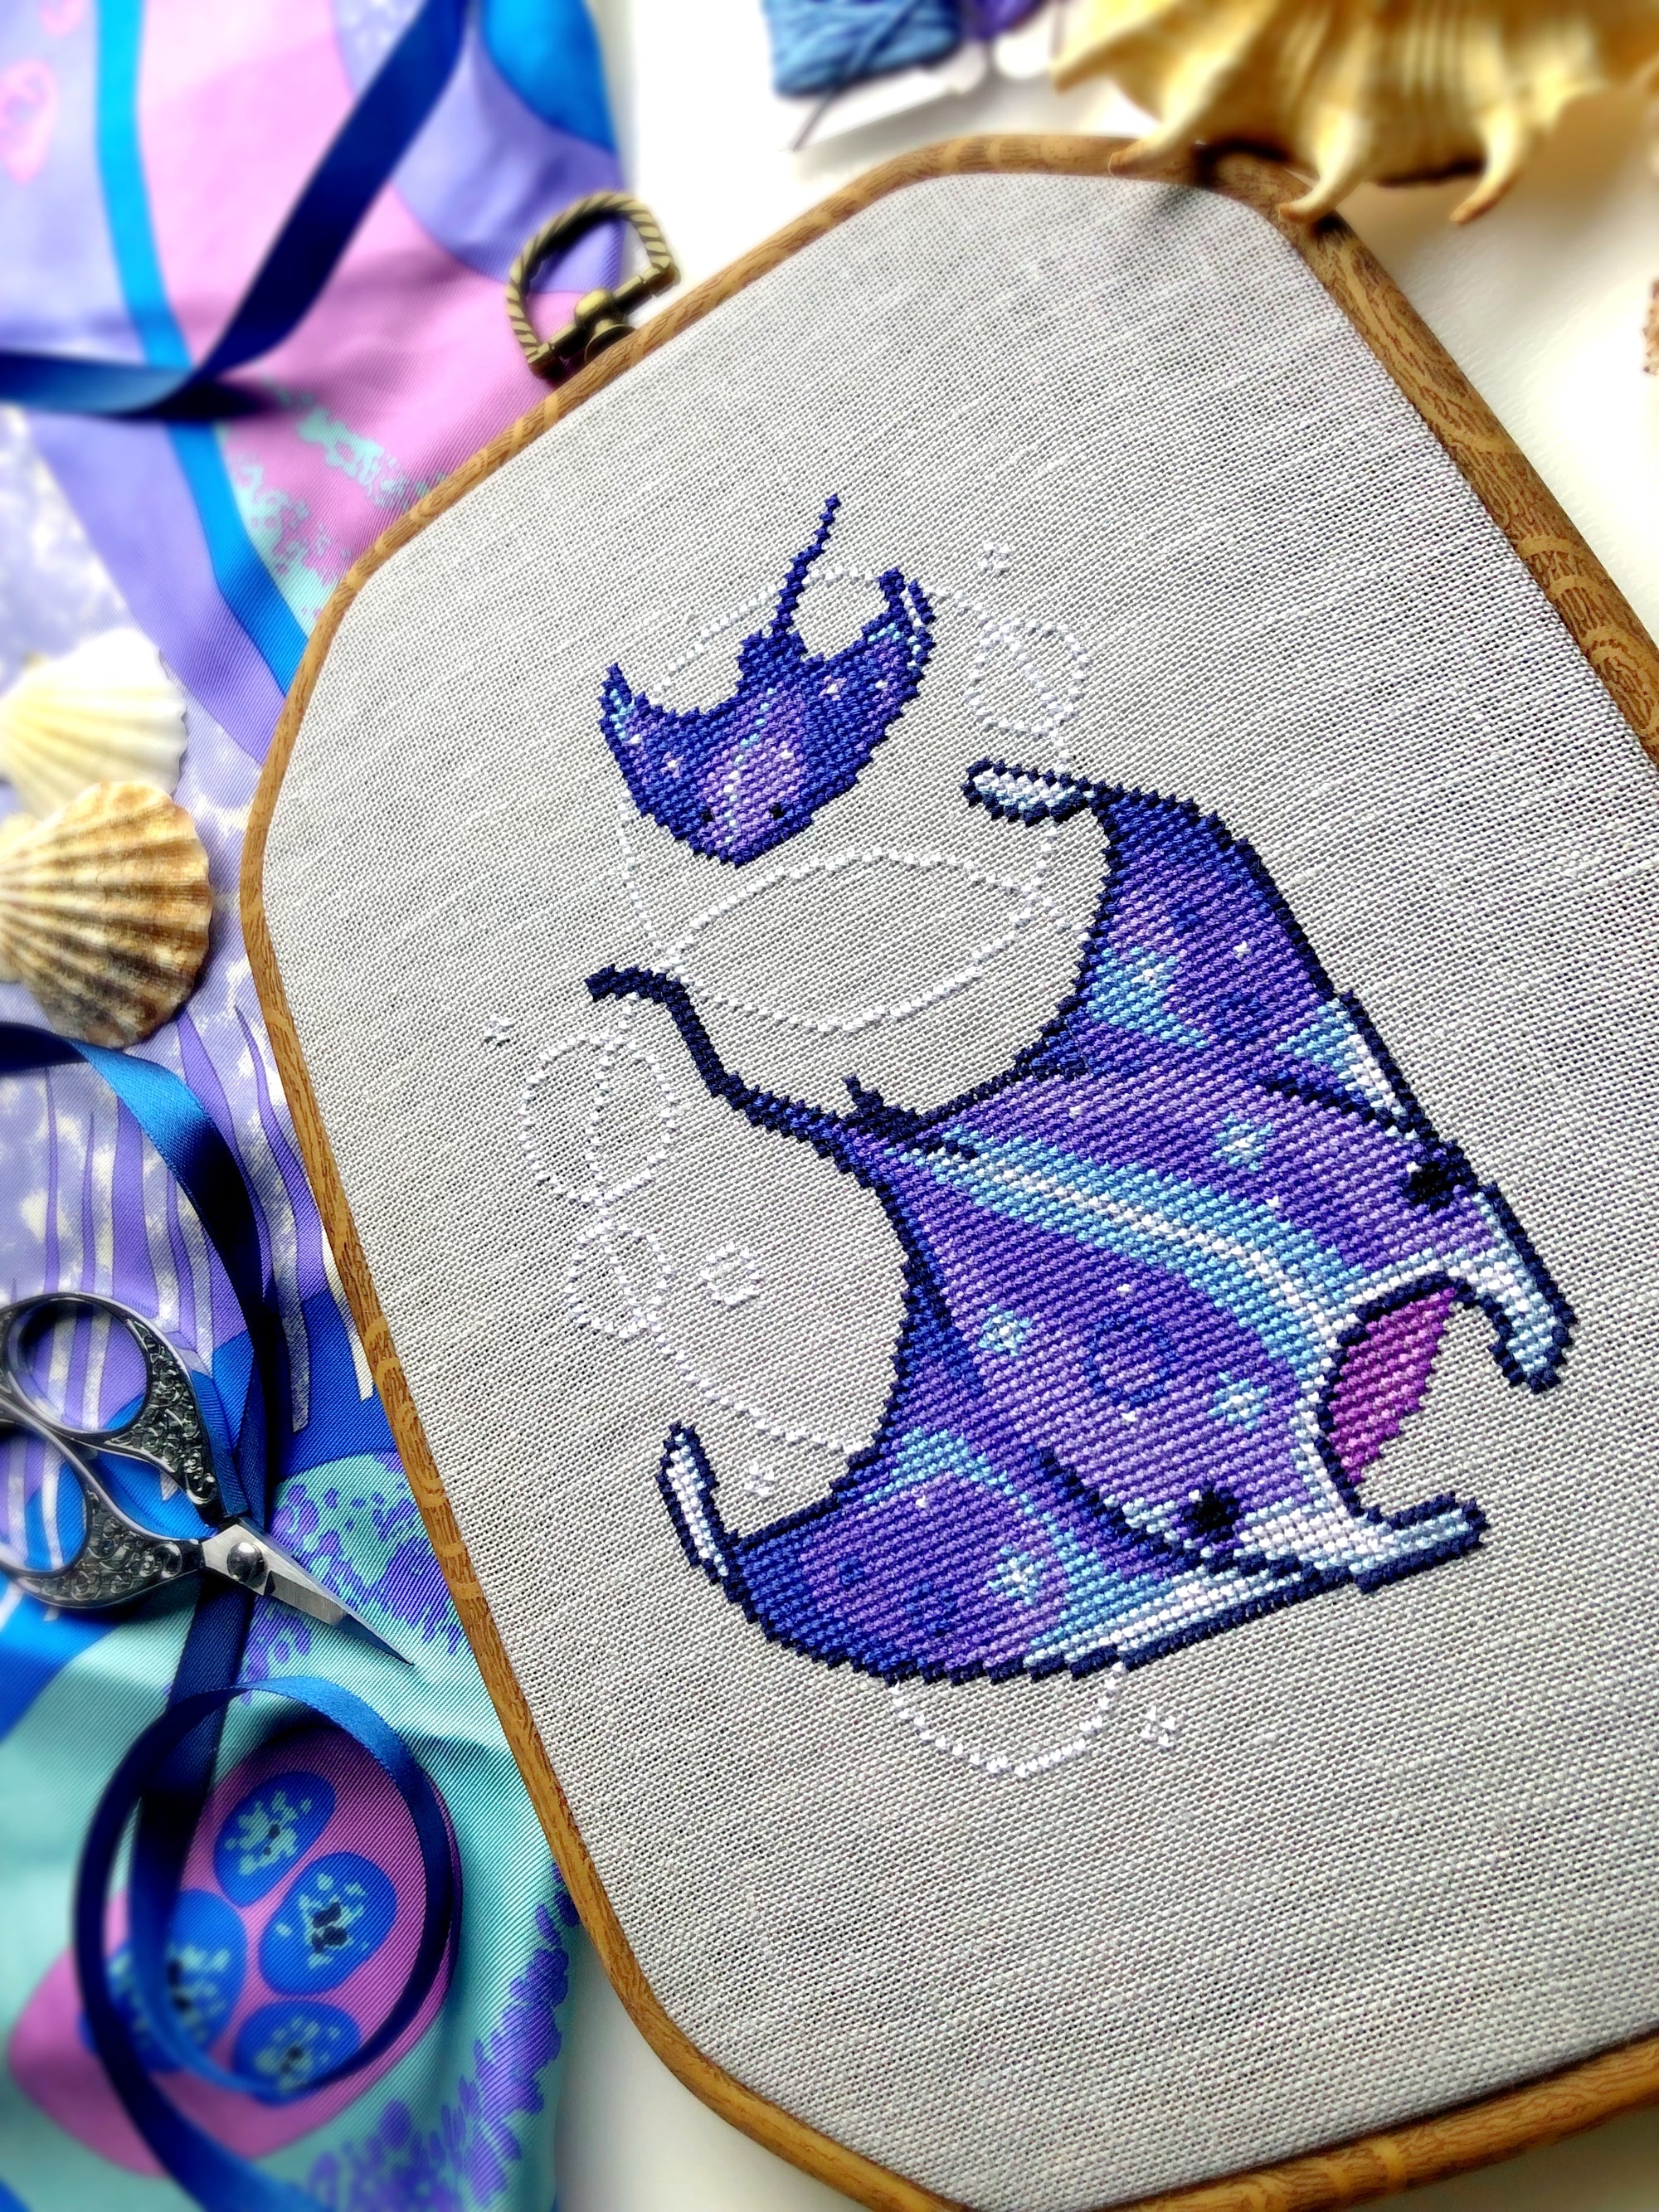  Slight closeup and angled view of ocean rays cross stitch pattern. Cross stitch pattern is of small to medium size. White bubbles are minimalist. Colors are vibrant and beautiful. Rays are soaring through the water.